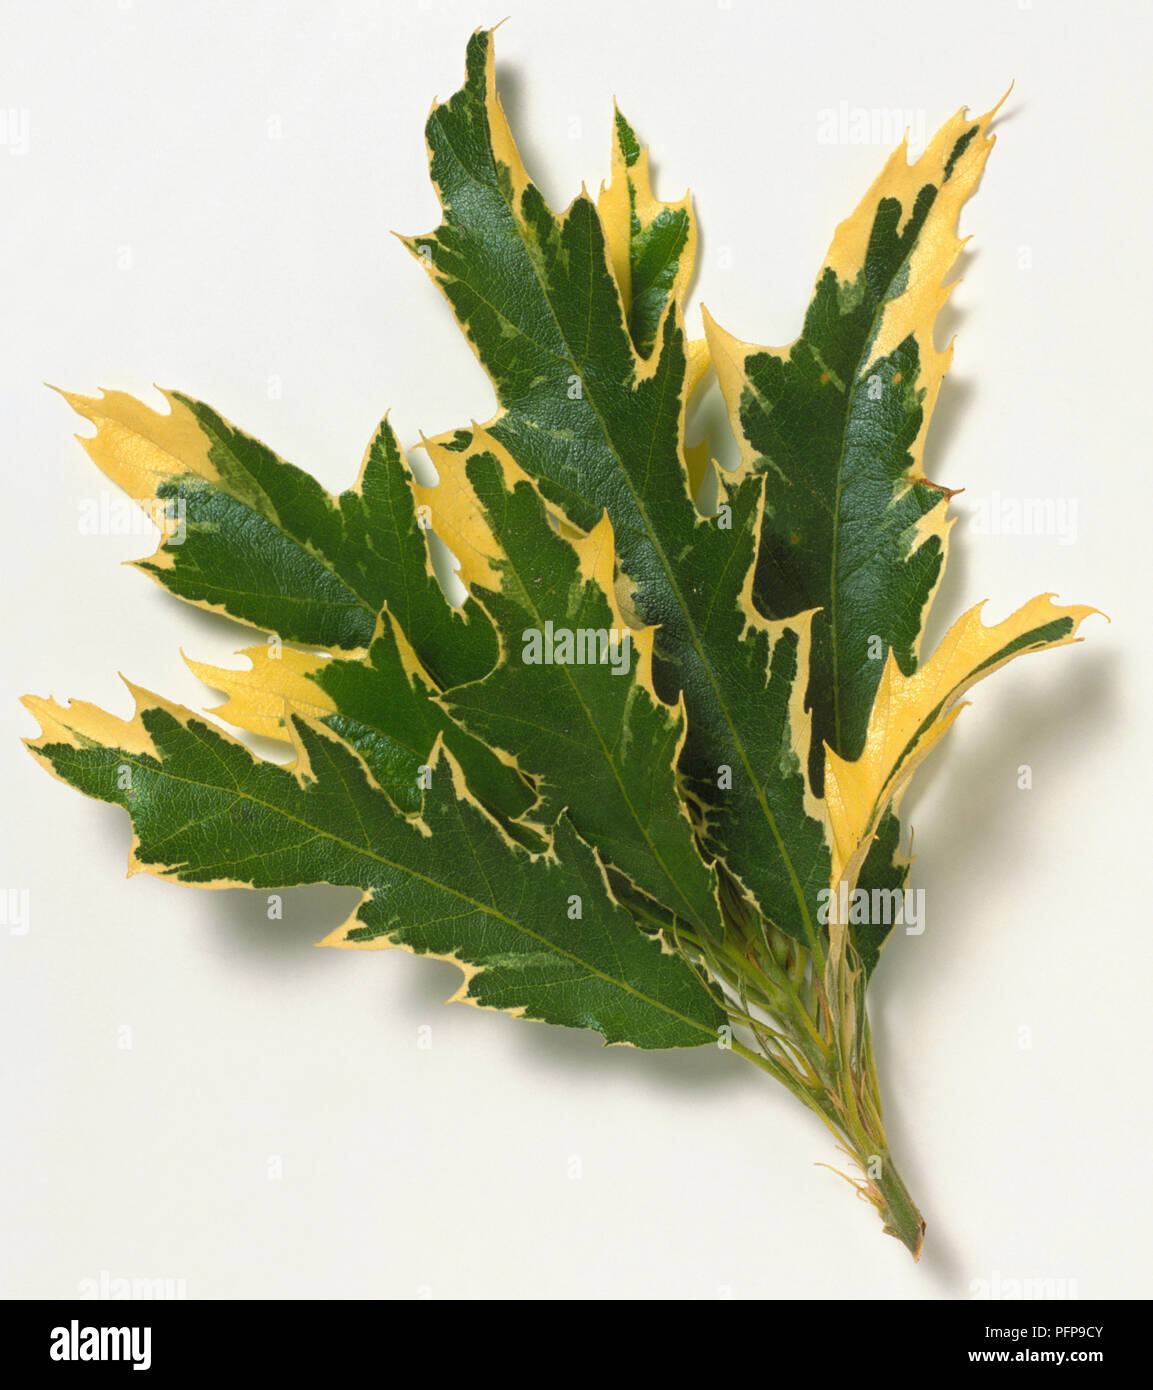 Fagaceae, Quercus cerris 'Variegata', Turkey Oak, deeply lobed, untoothed green leaves with yellow margins. Stock Photo